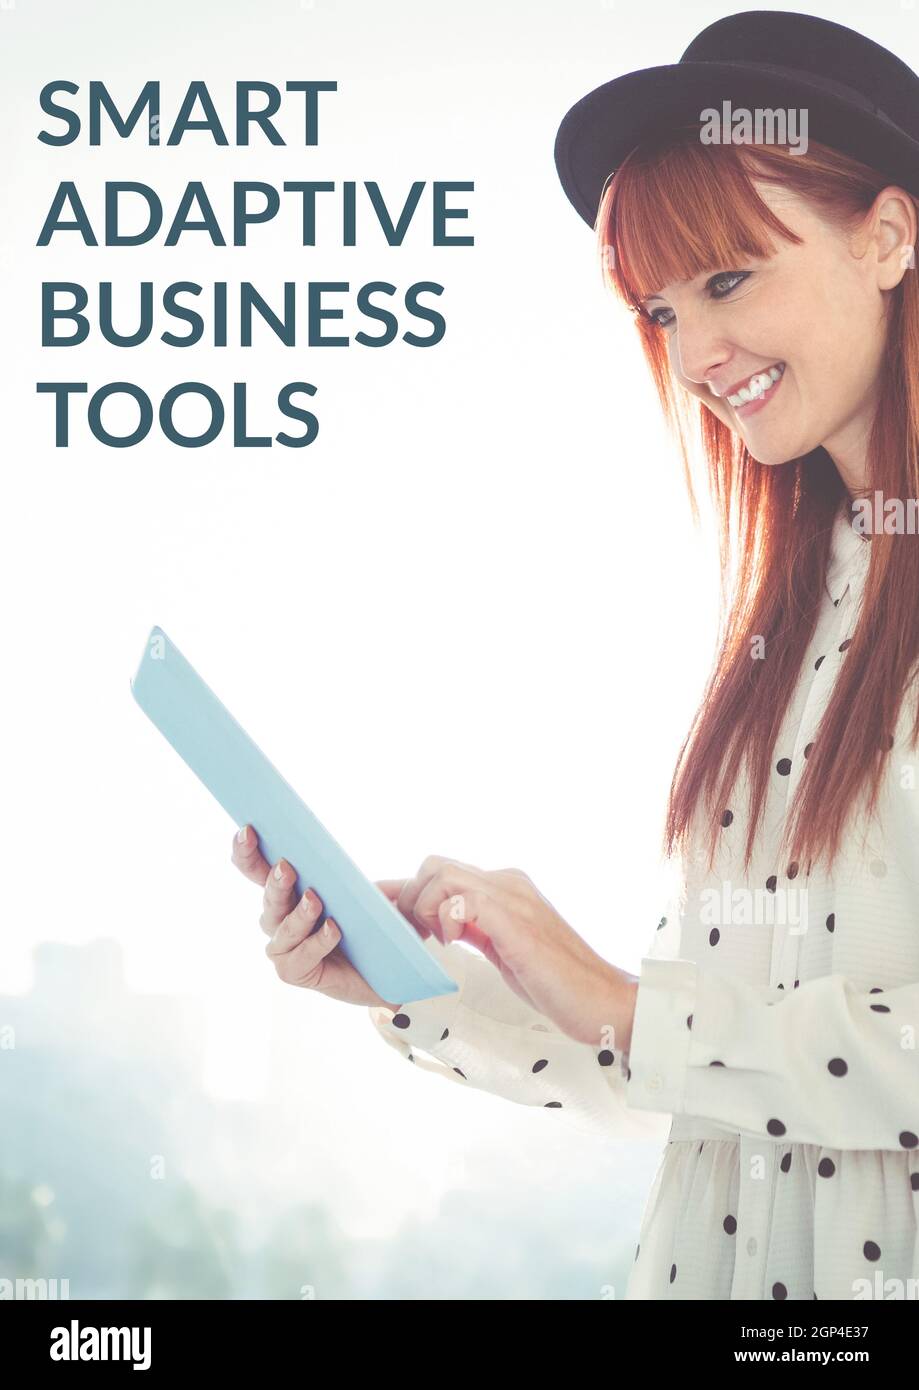 Composition of business tools text over caucasian woman using tablet and smiling Stock Photo